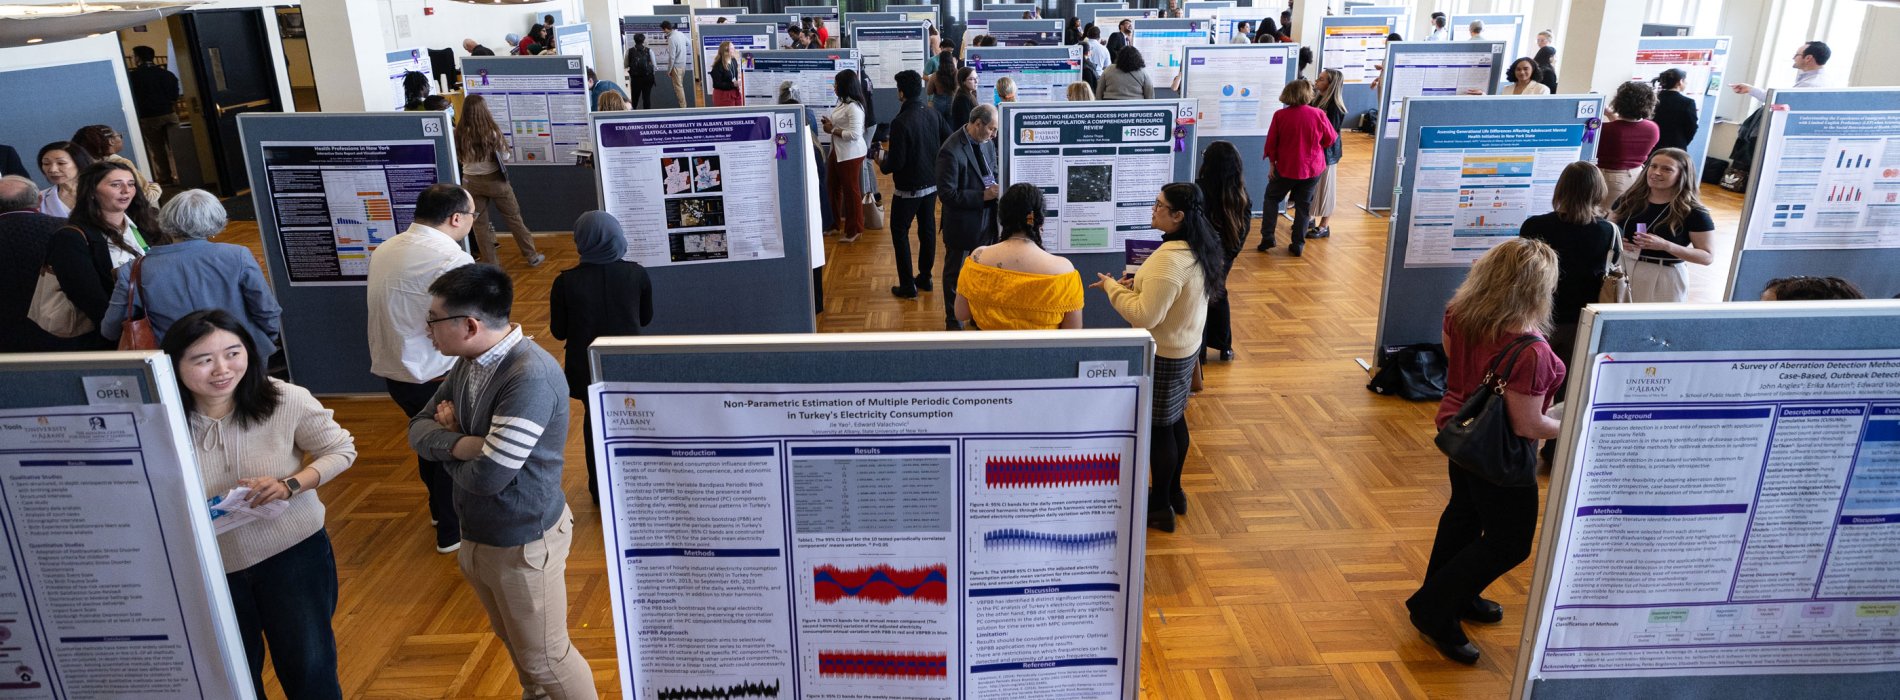 Dozens of students present research posters to attendees inside an exhibition space during UAlbany Showcase.